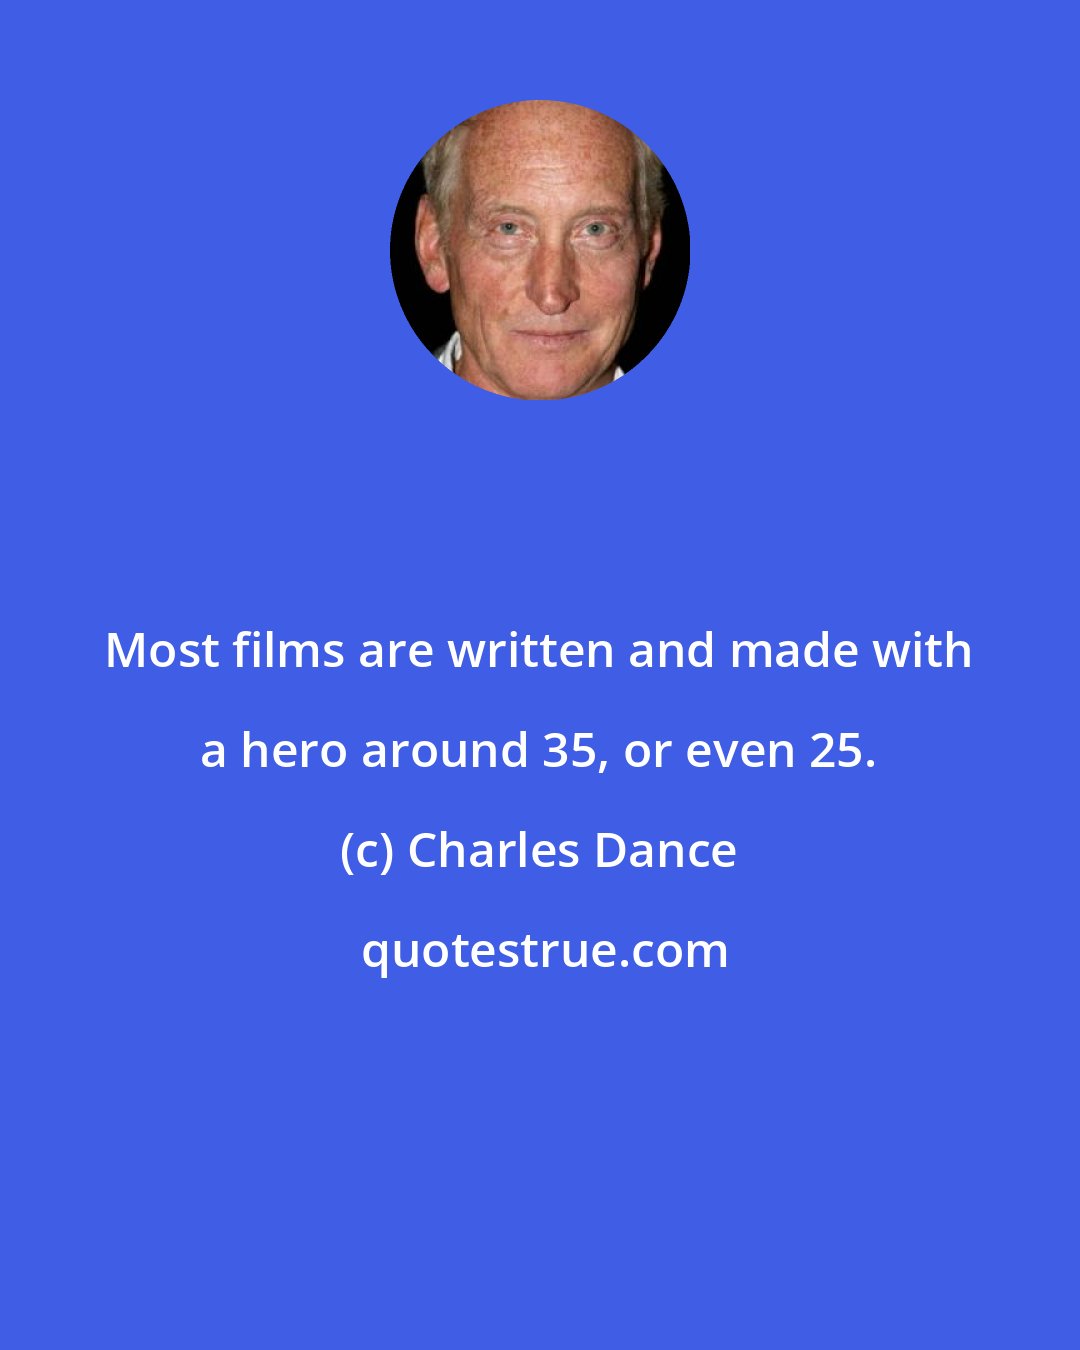 Charles Dance: Most films are written and made with a hero around 35, or even 25.